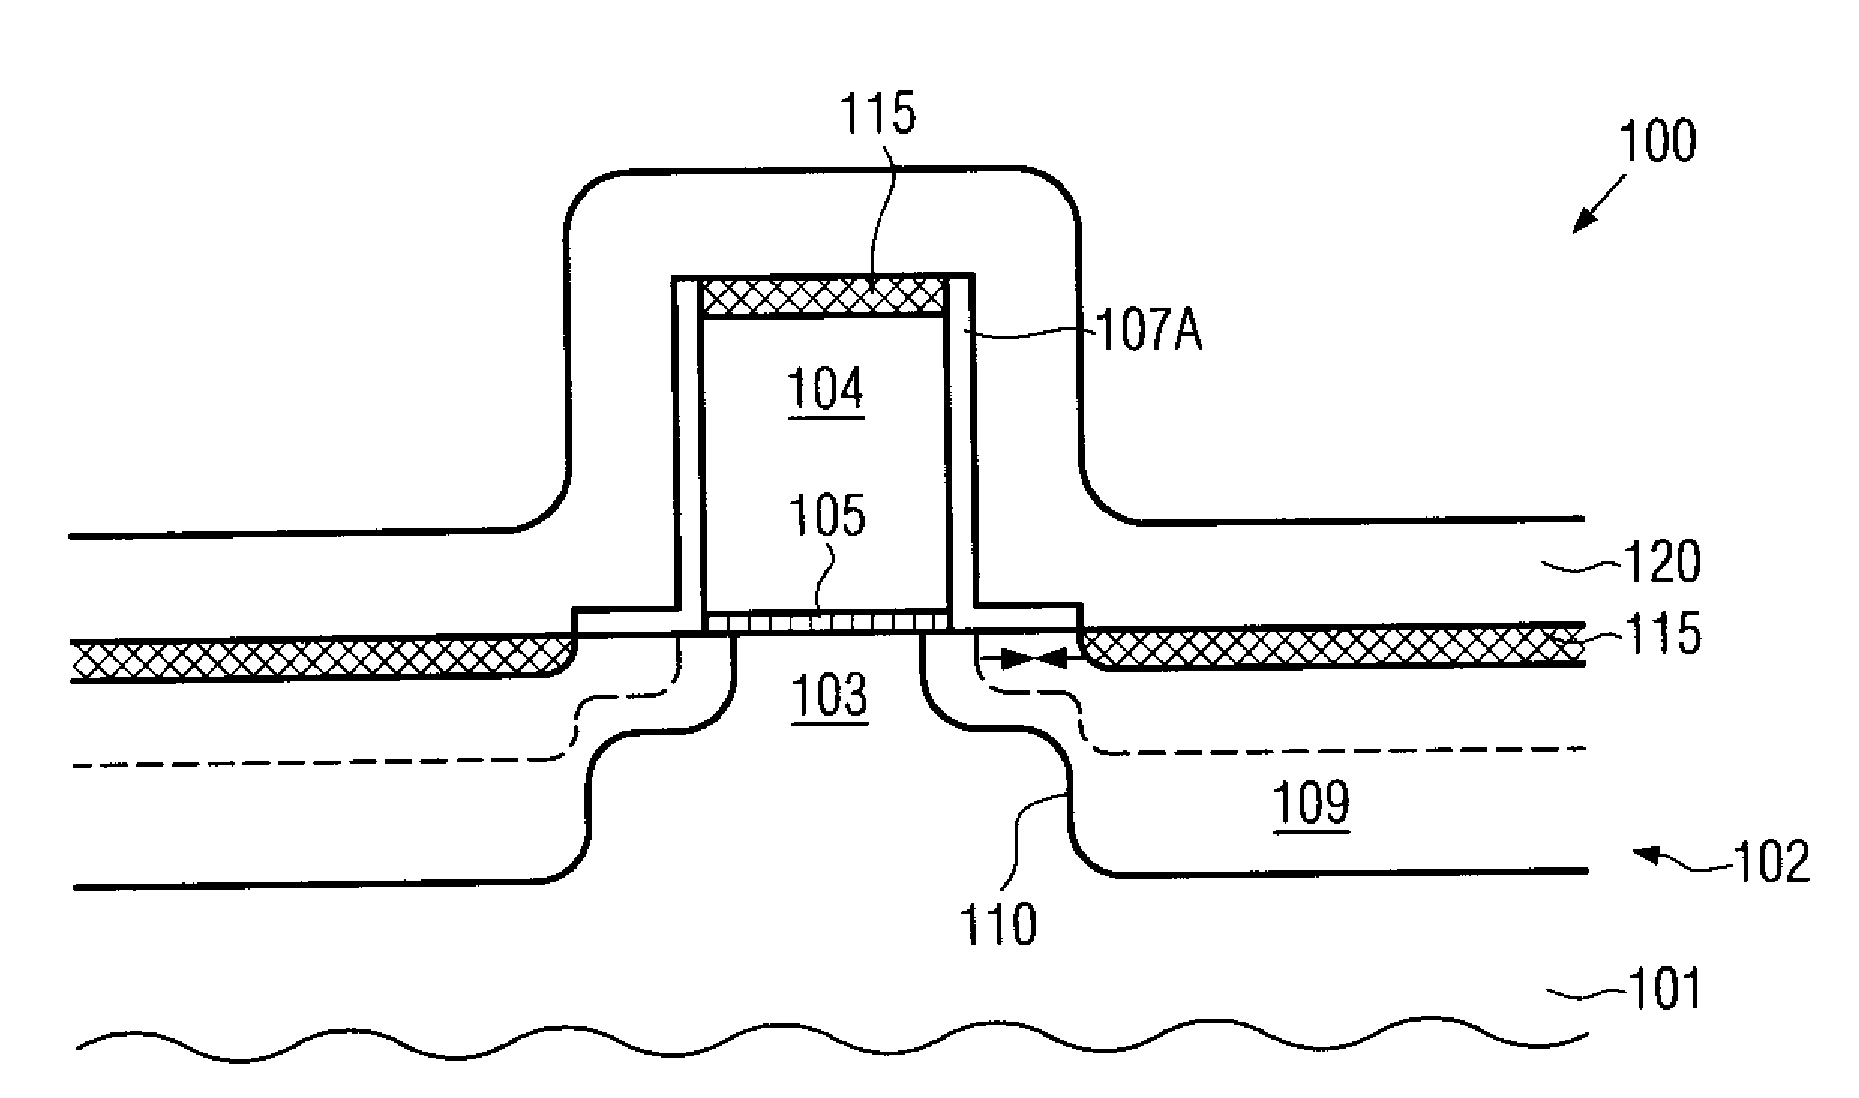 Transistor having an embedded tensile strain layer with reduced offset to the gate electrode and a method for forming the same